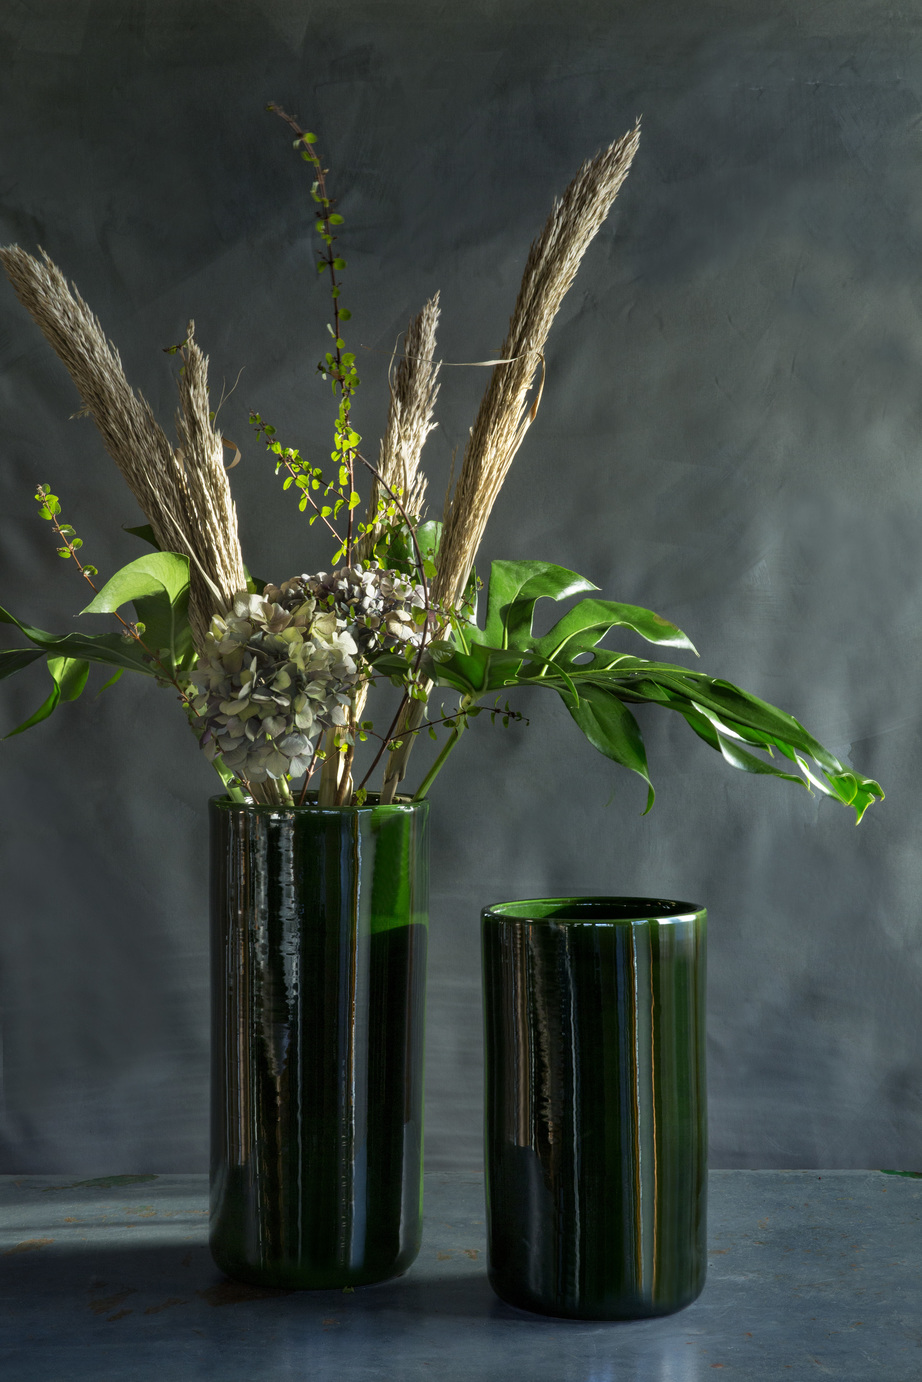 Two simple green glazed floor vases with flowers